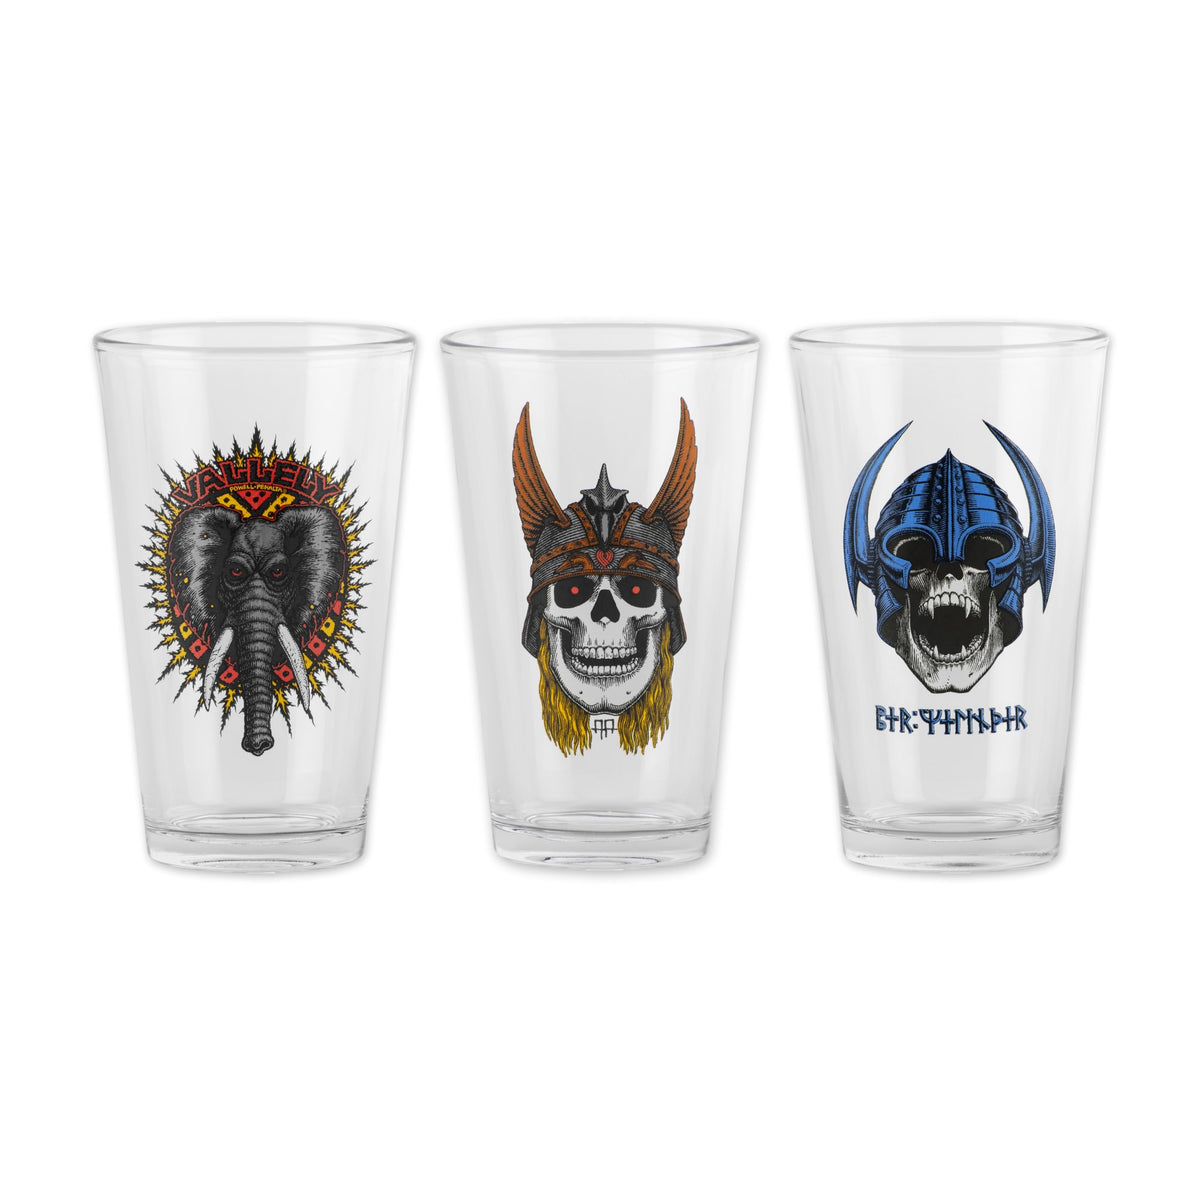 Powell Peralta Andy Anderson, Mike Vallely, and Welinder Pint Glasses